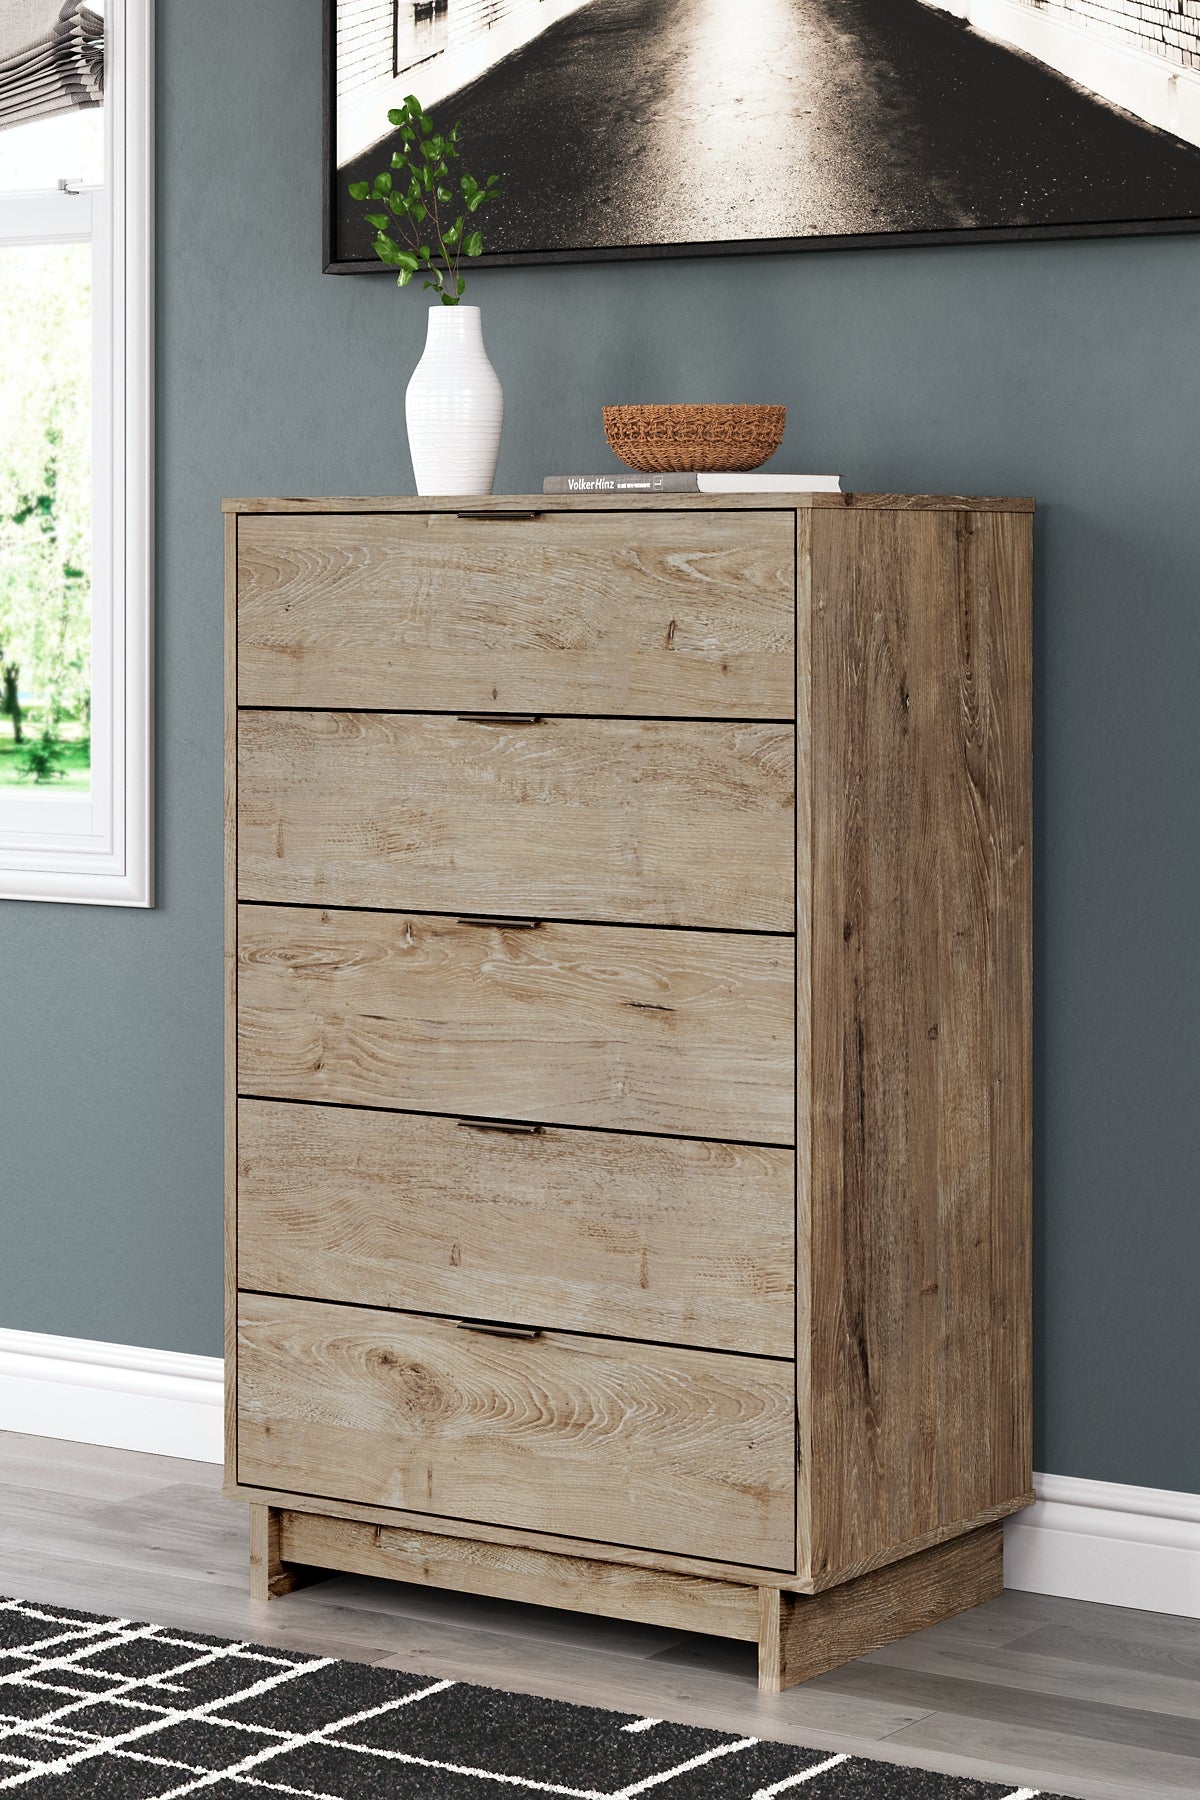 Oliah Five Drawer Chest Signature Design by Ashley®